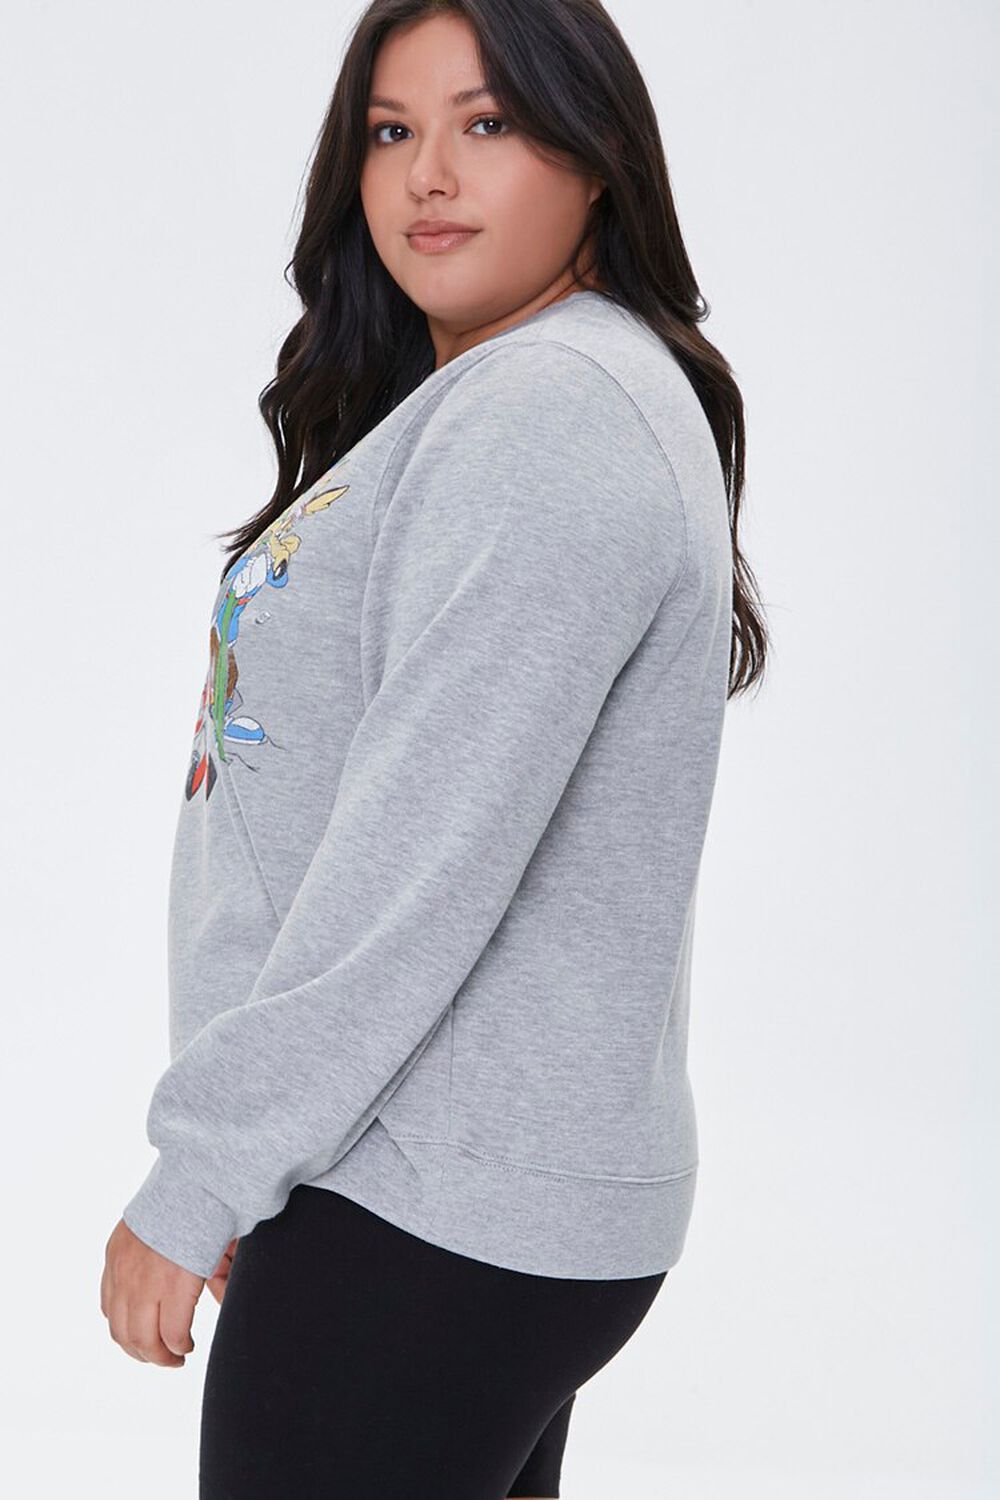 HEATHER GREY/MULTI Plus Size Looney Tunes Graphic Pullover, image 2